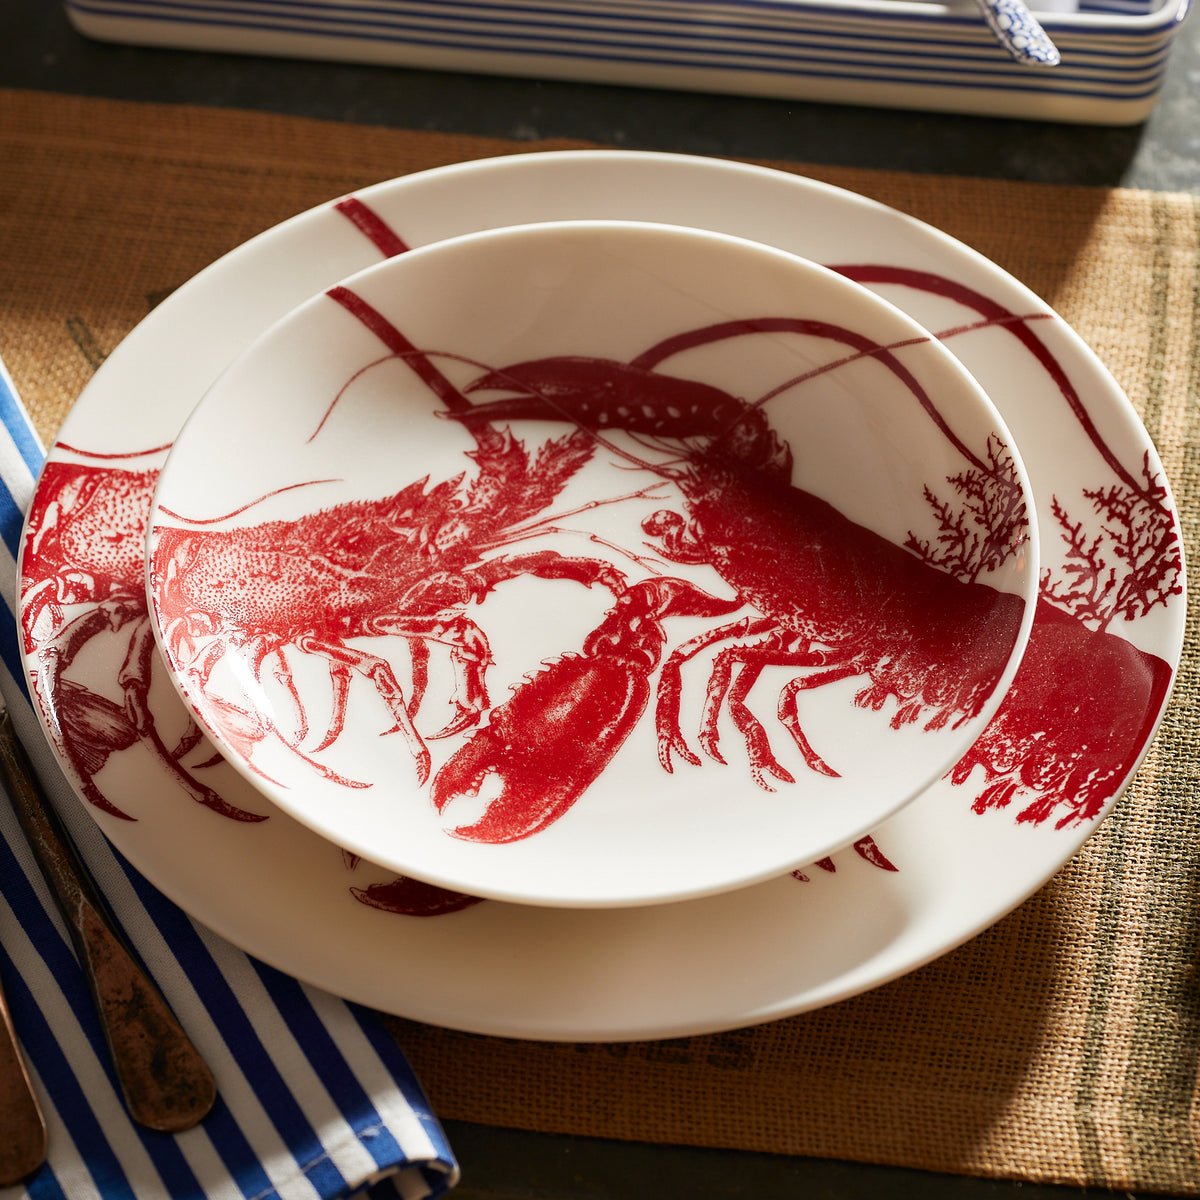 A round dinner plate and a matching shallow bowl, both featuring red lobster illustrations, are set on a woven placemat with a blue and white striped napkin beside them. This stunning Beach Wedding Bundle by Caskata is made from lead-free porcelain and is both dishwasher and microwave safe.